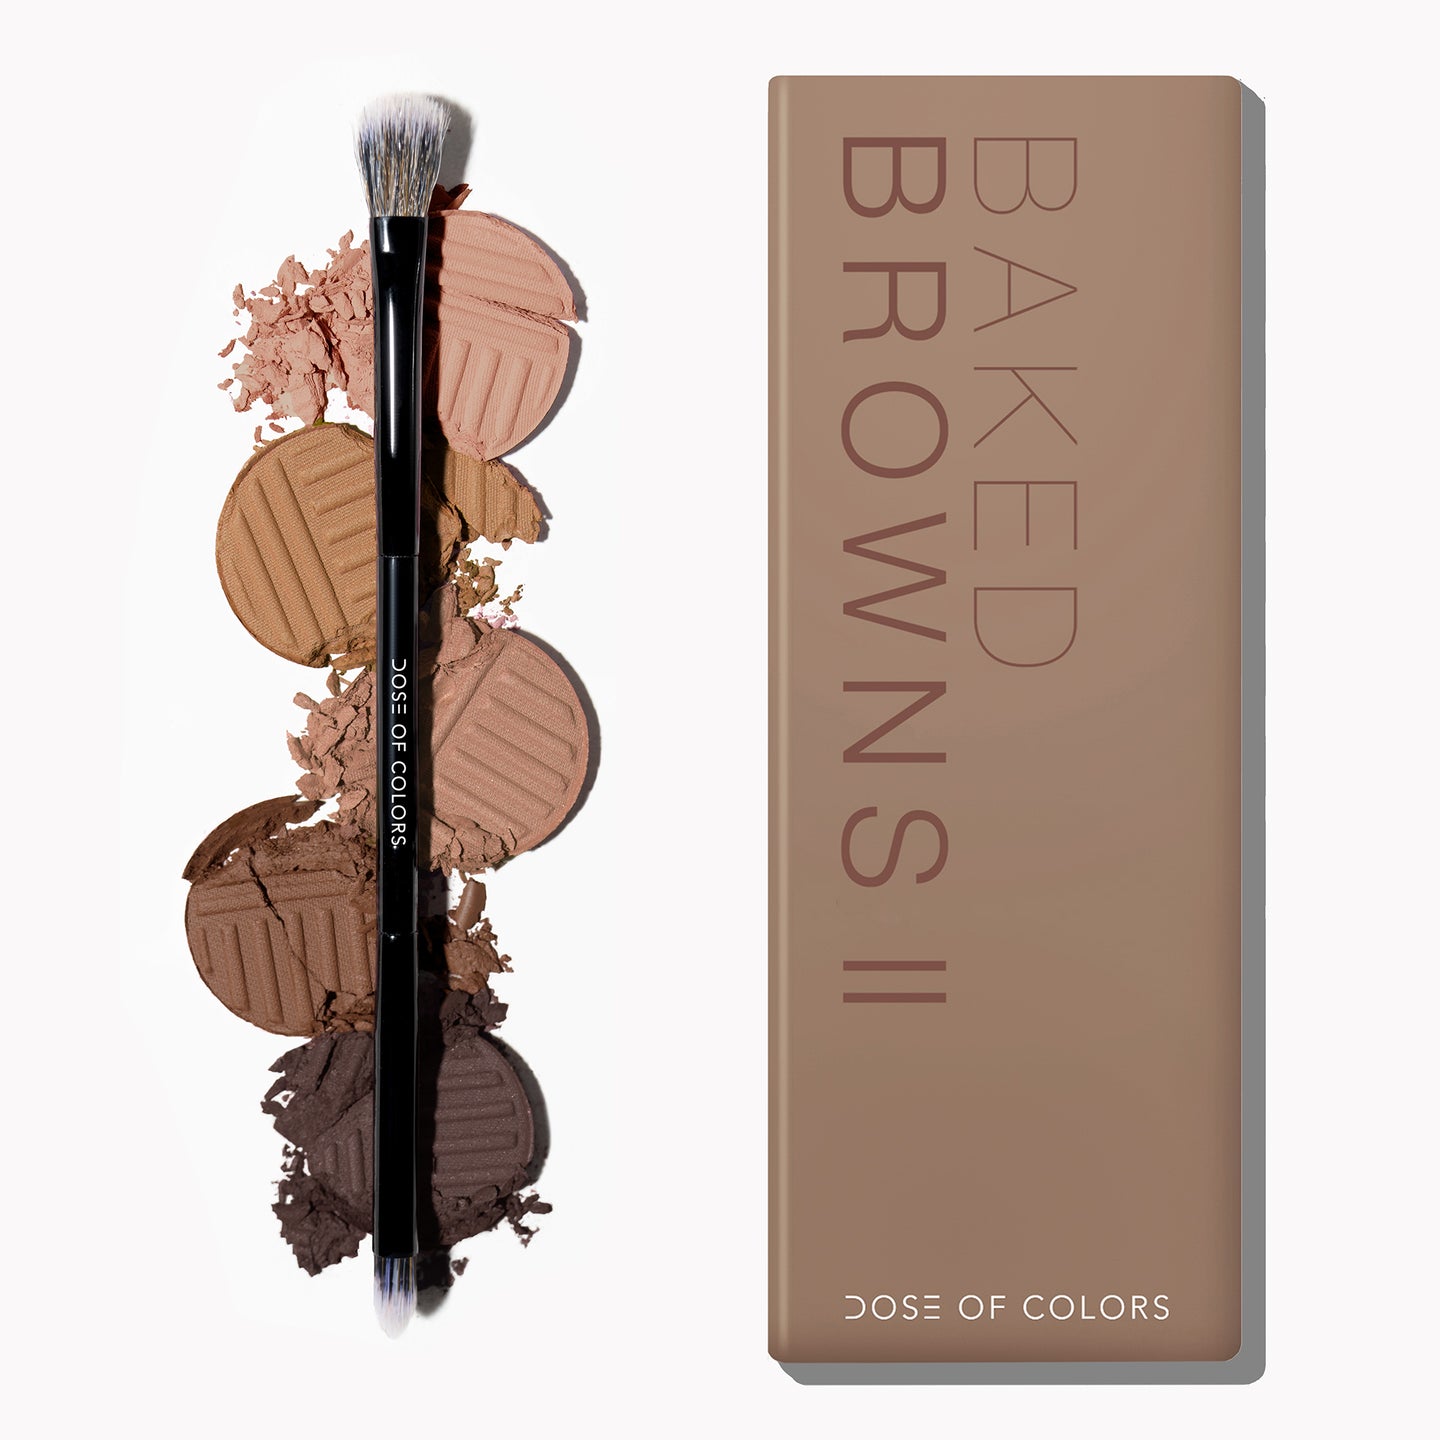 BAKED BROWNS Il EYESHADOW PALETTE